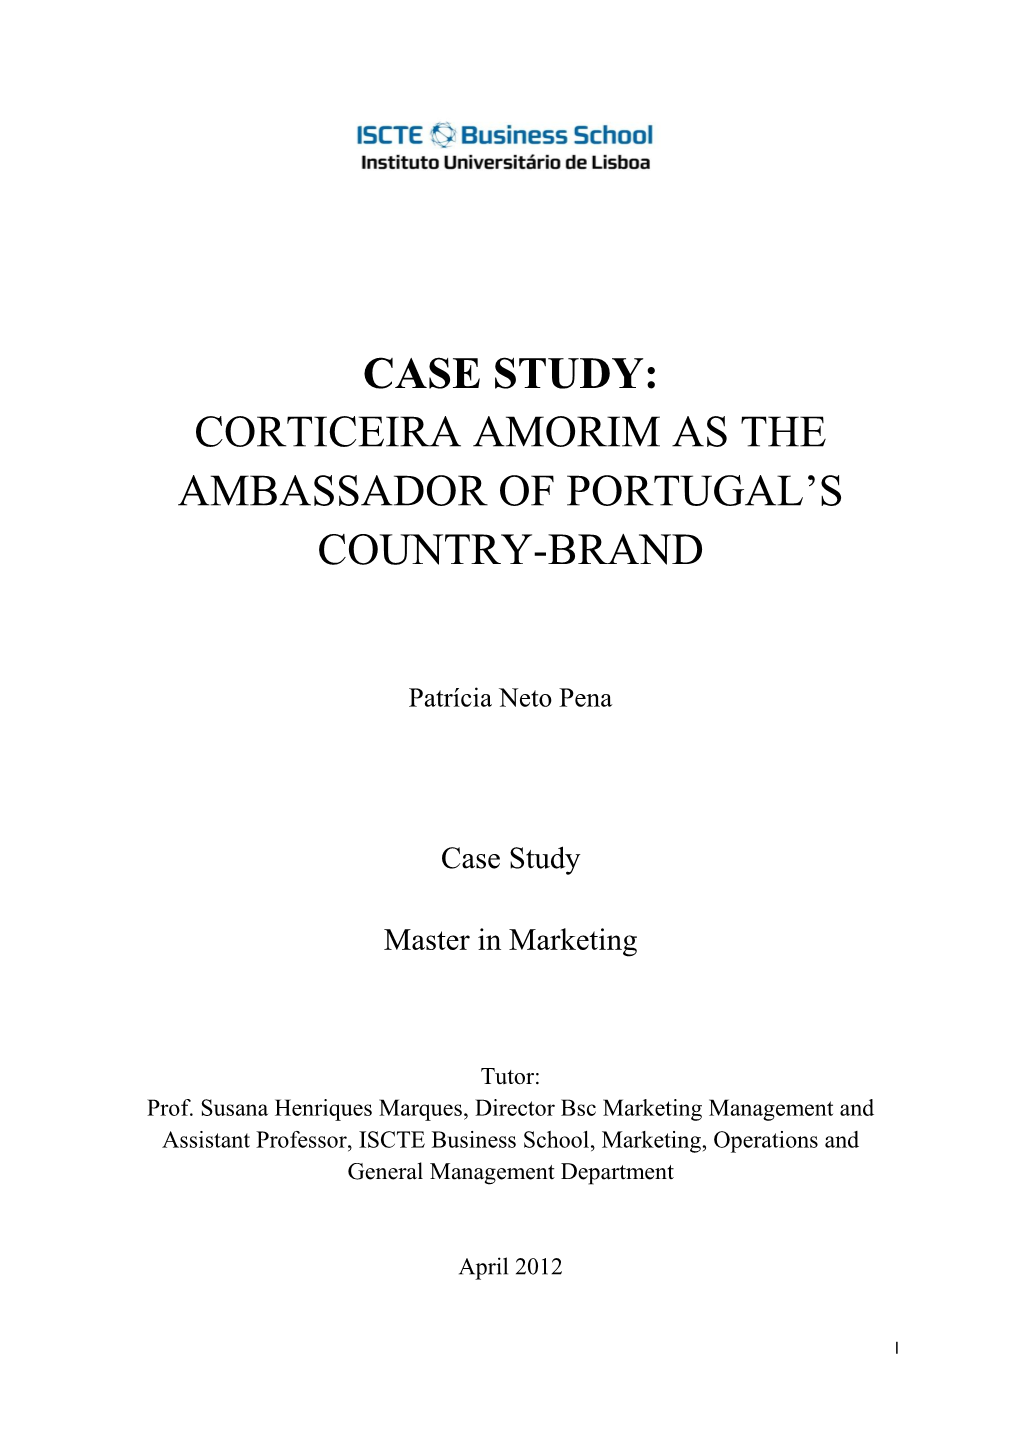 Case Study: Corticeira Amorim As the Ambassador of Portugal's Country-Brand